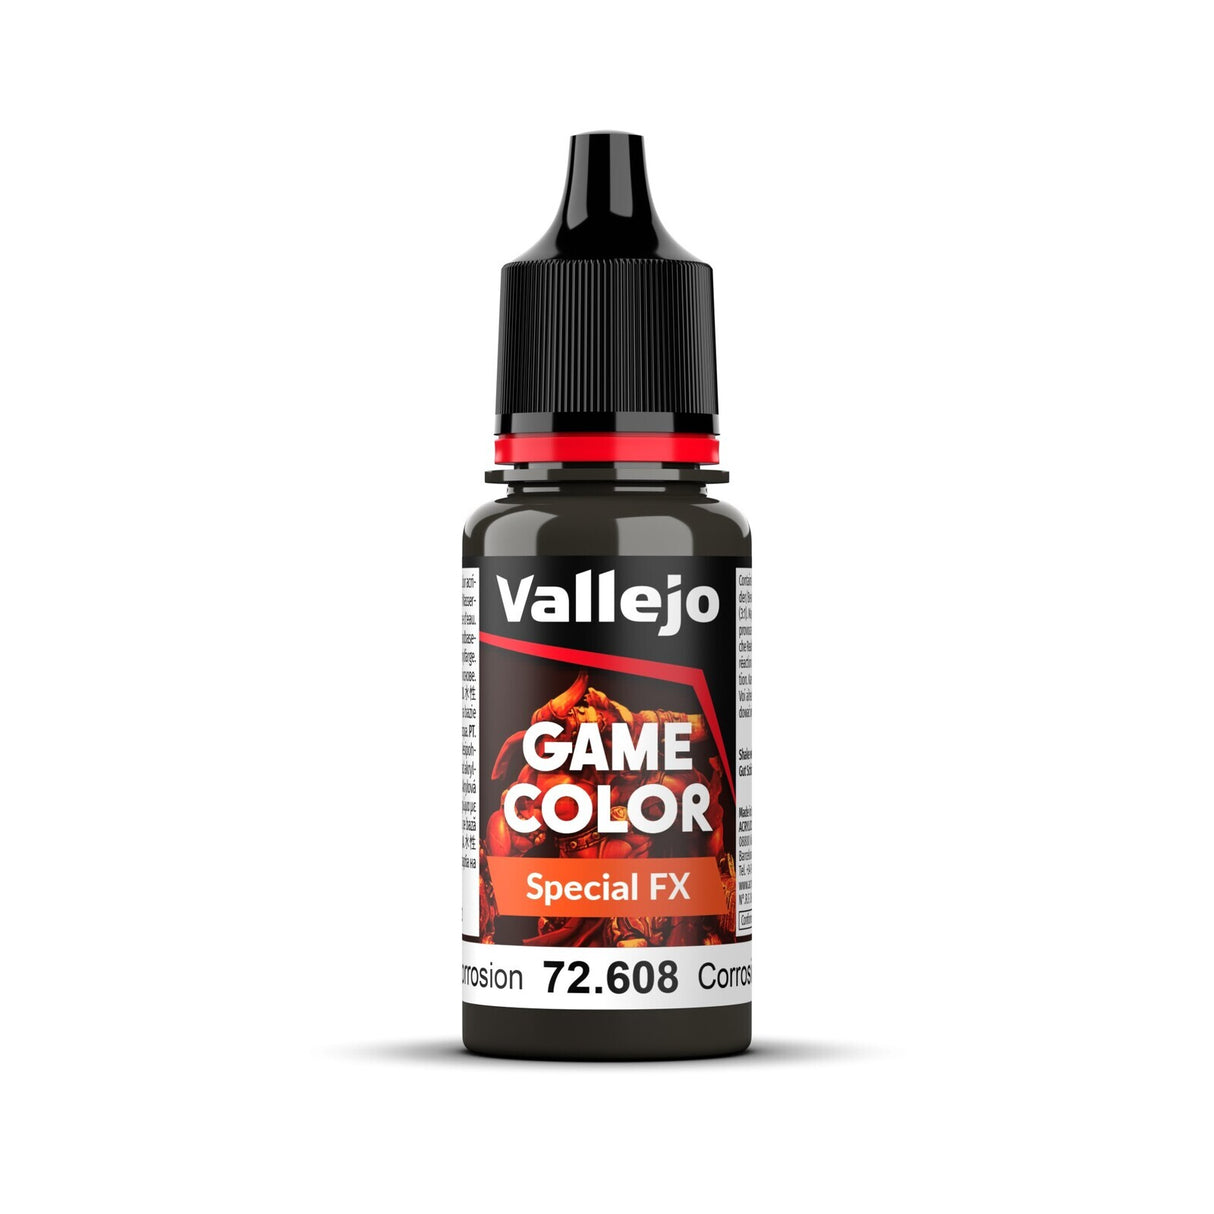 Vallejo Game Color Special FX Corrosion 18ml Acrylic Paint - Hobbytech Toys